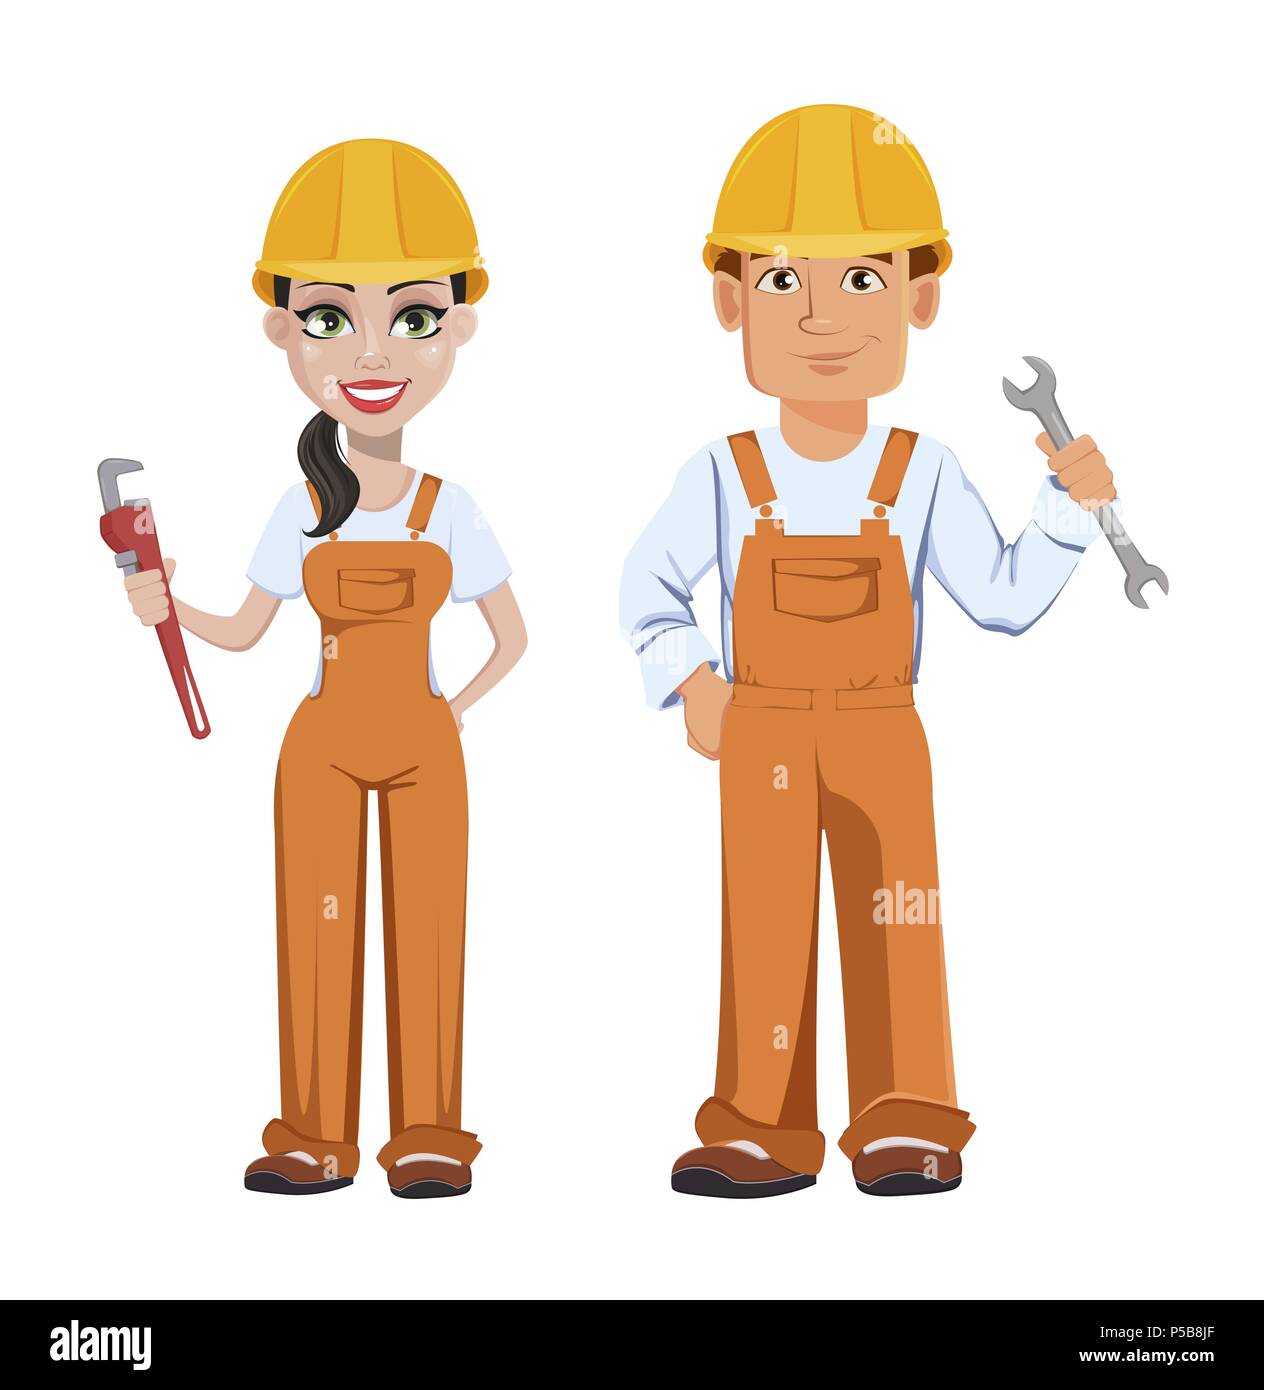 Builder man and woman in uniform, cartoon characters. Professional construction workers. Smiling repairman with wrench and woman with adjustable wrenc Stock Vector